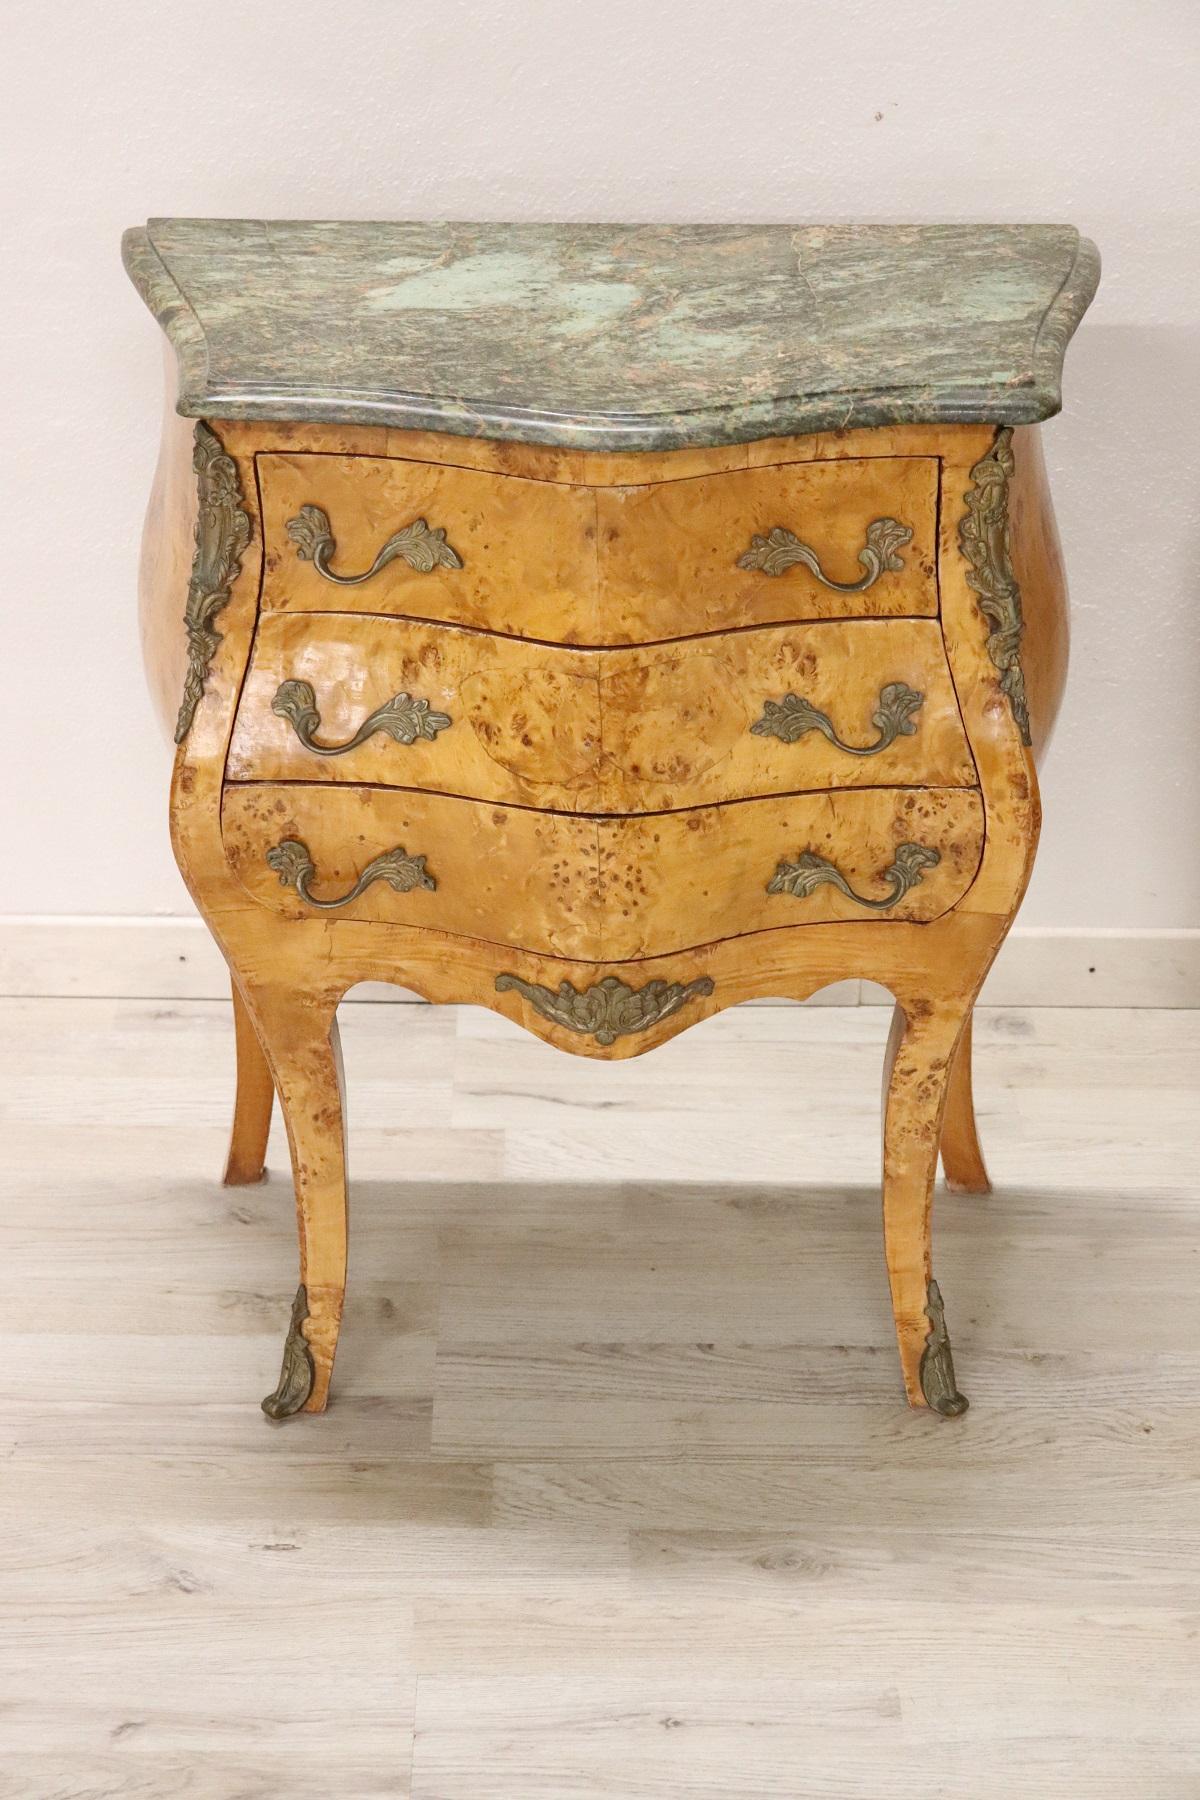 Italian Venetian Louis XV style furniture richly adorned with chiseled bronze. The rare birch wood burl. The top is in precious green marble. Particular rounded shape. On the front three comfortable and spacious drawers. A pair of really elegant ,